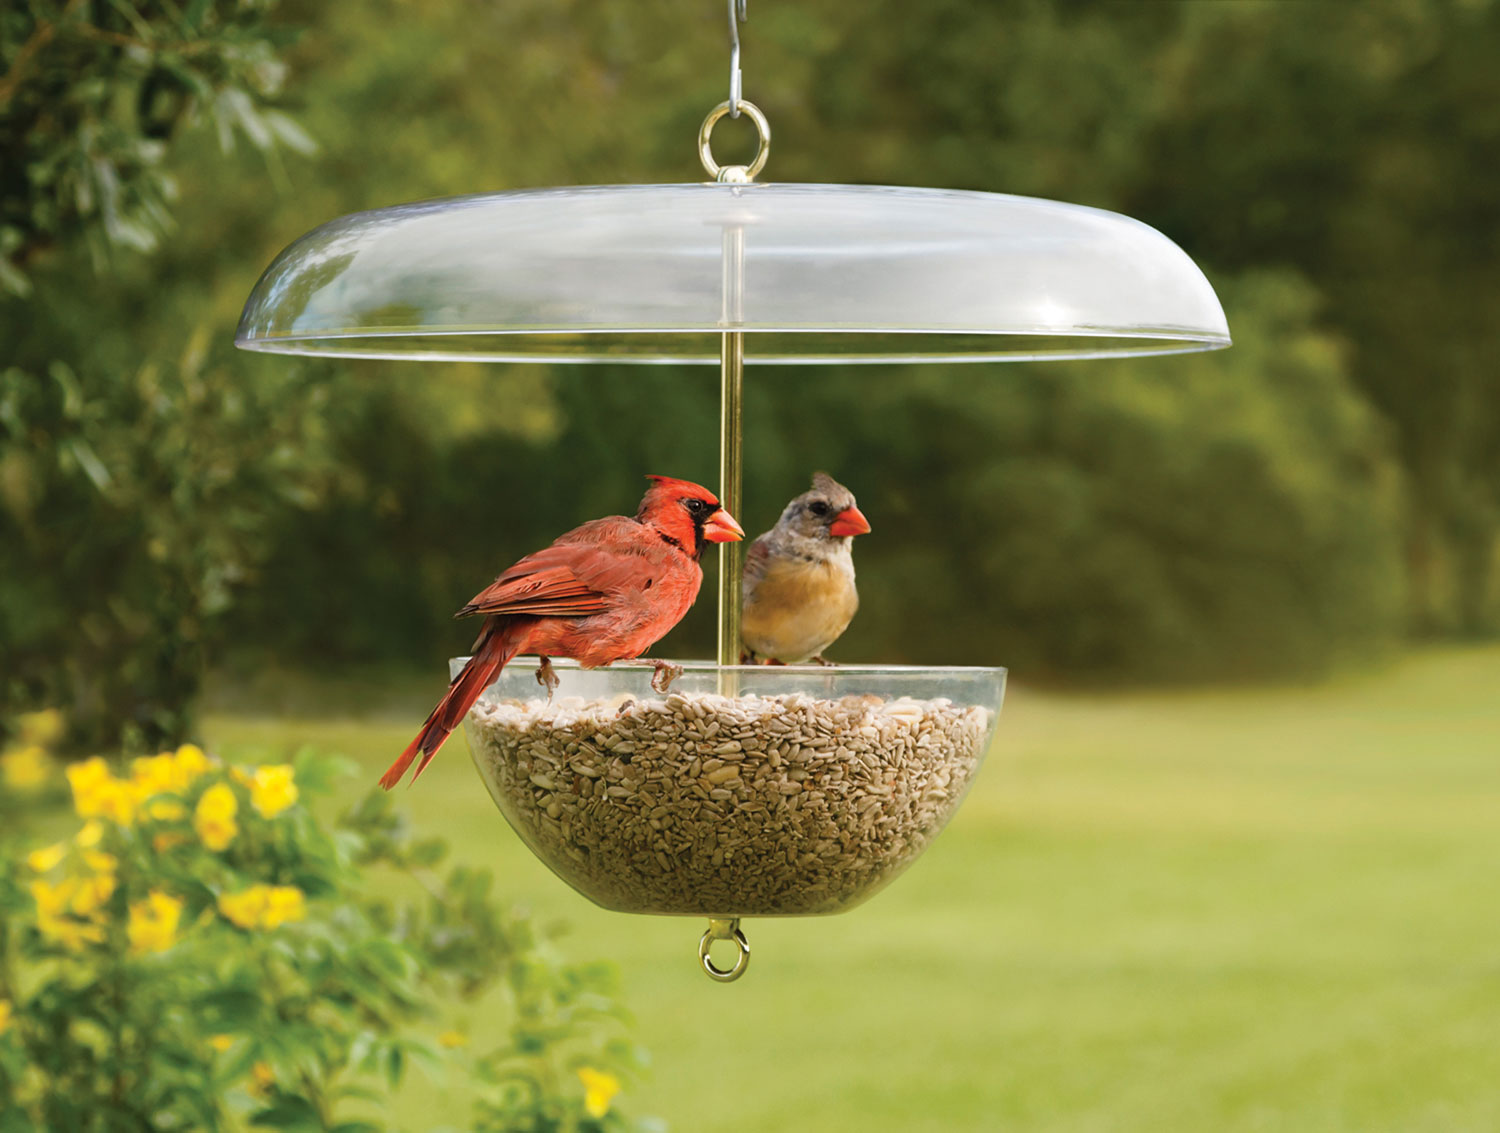 Feeder How To Dress Cardinals In The Back Yard Of Your Home (Great Tips)